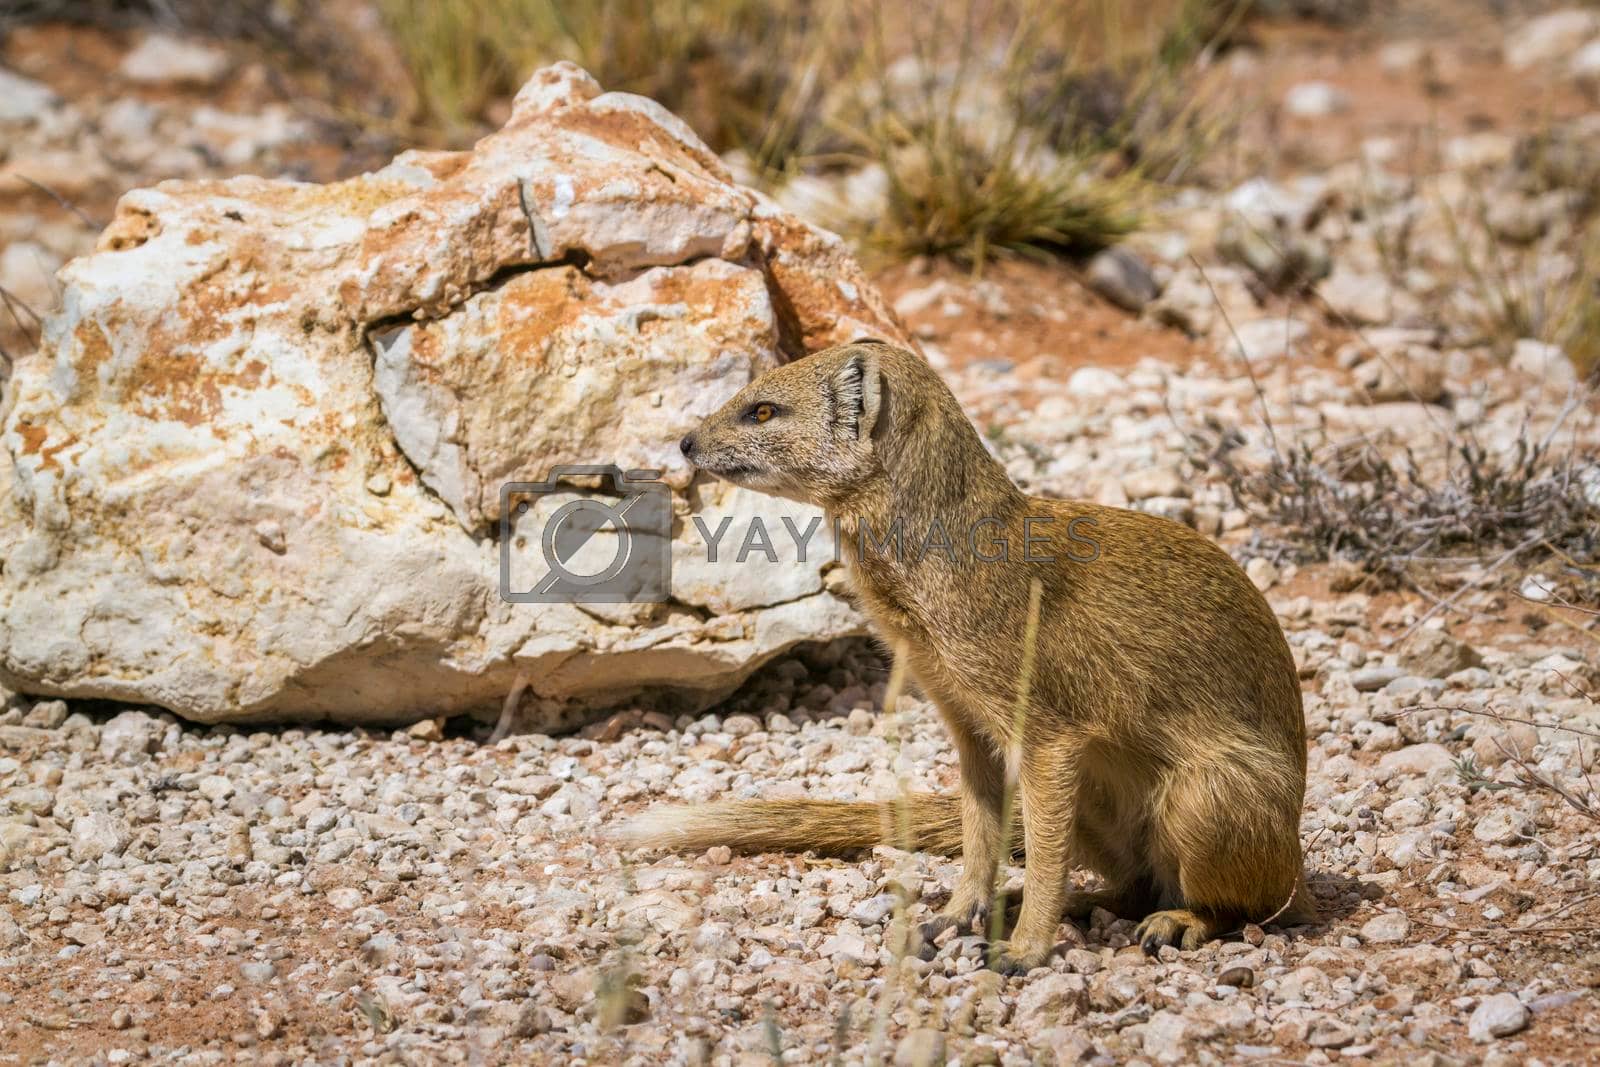 Royalty free image of Yellow mongoose in Kgalagadi transfrontier park, South Africa by PACOCOMO